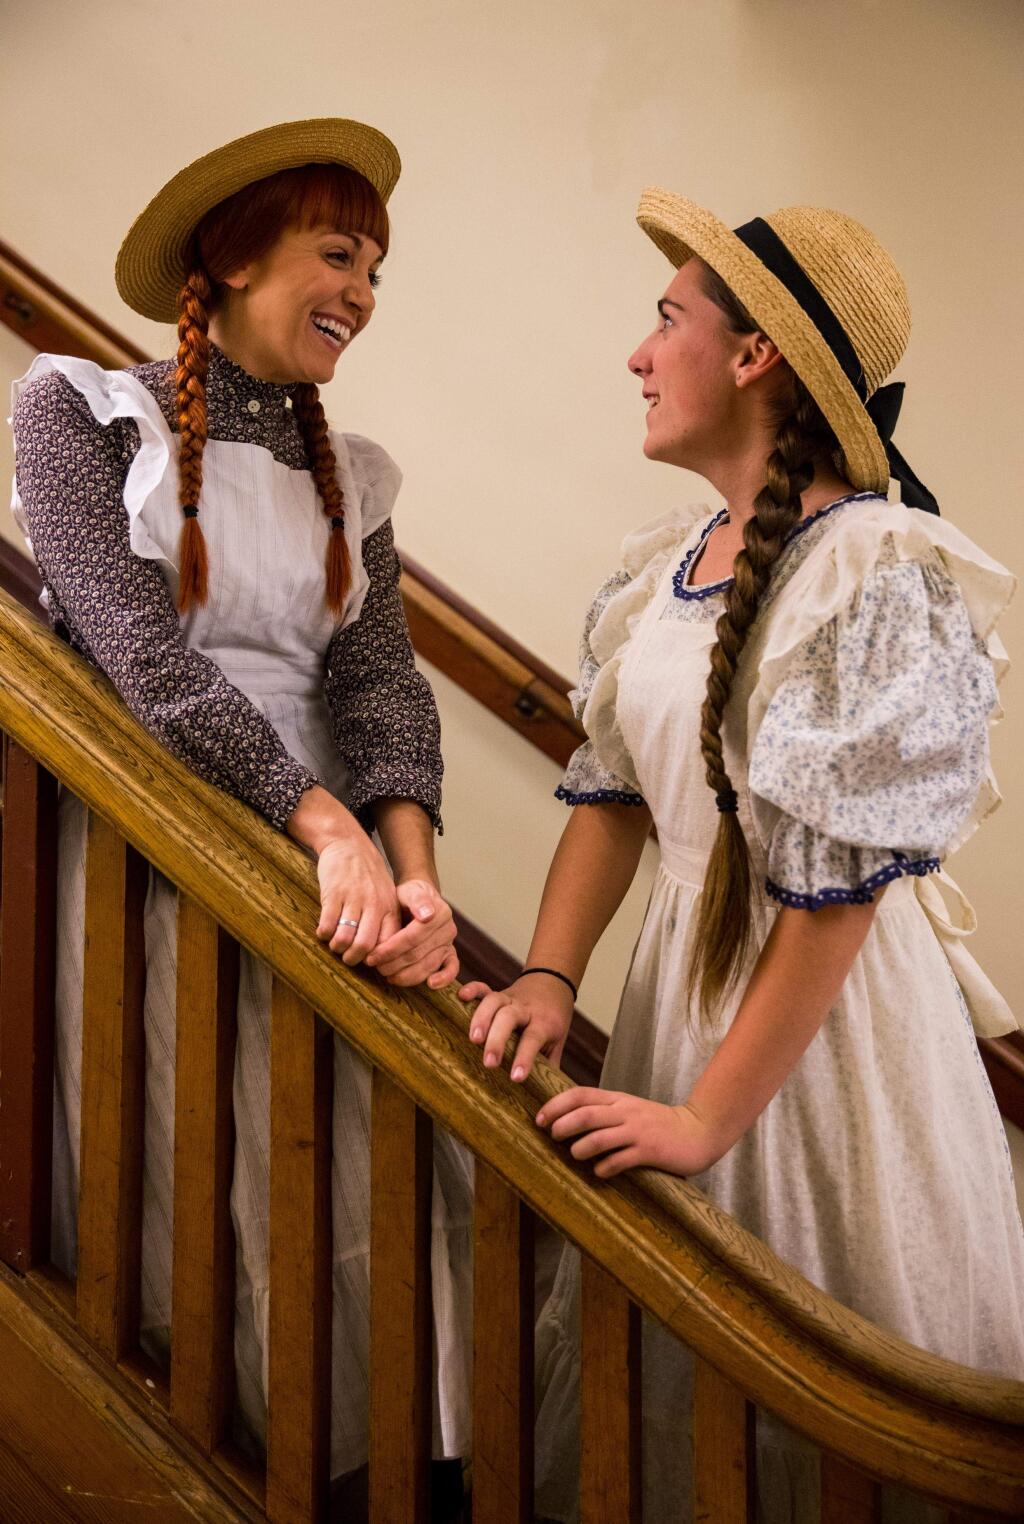 Cast members of 'Anne of Green Gables' will be at the library this week. Photo by Miller Oberlin.